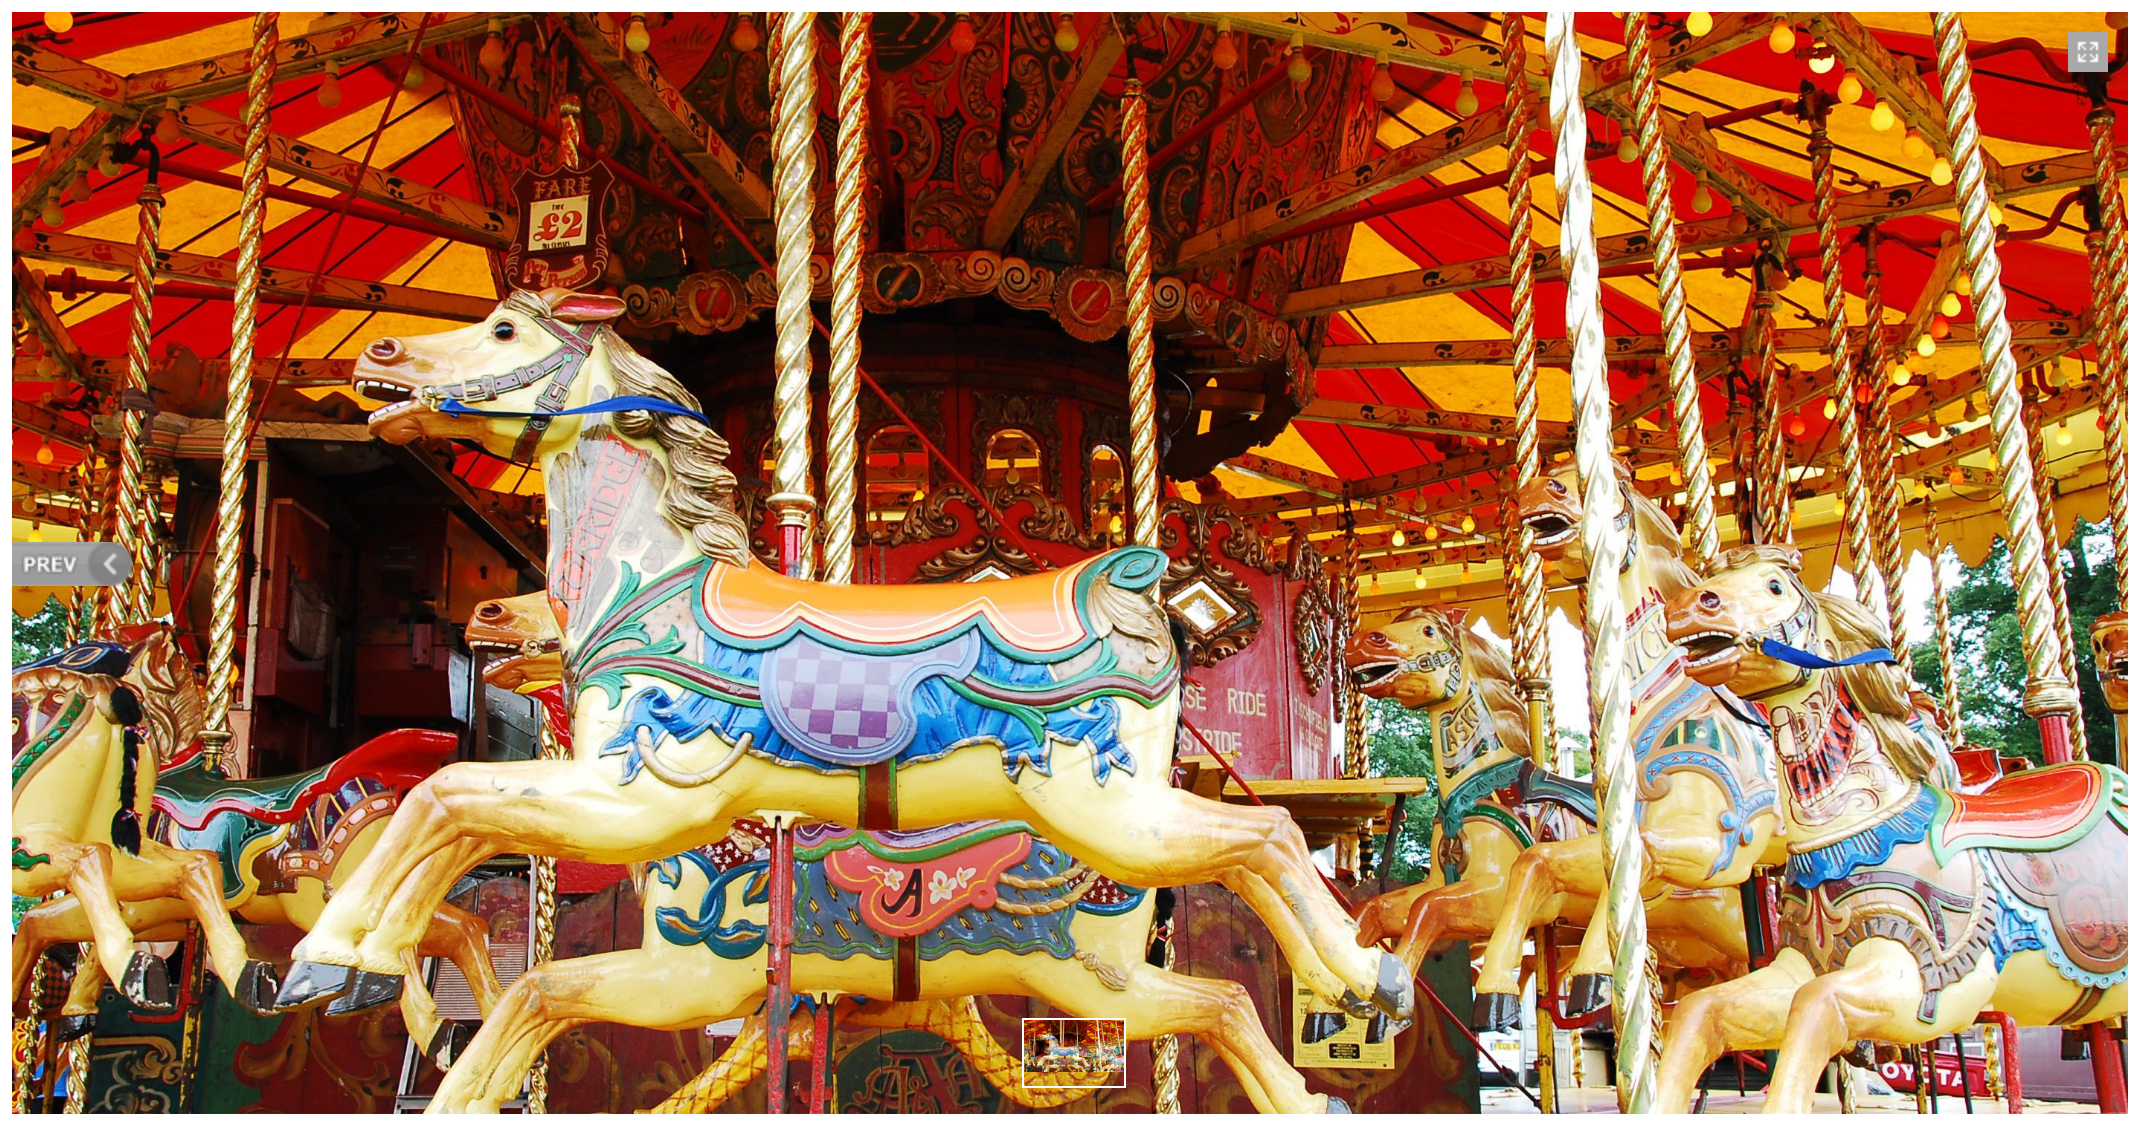 The Merry-Go-Round Emotion of Change | Anglican Pastor